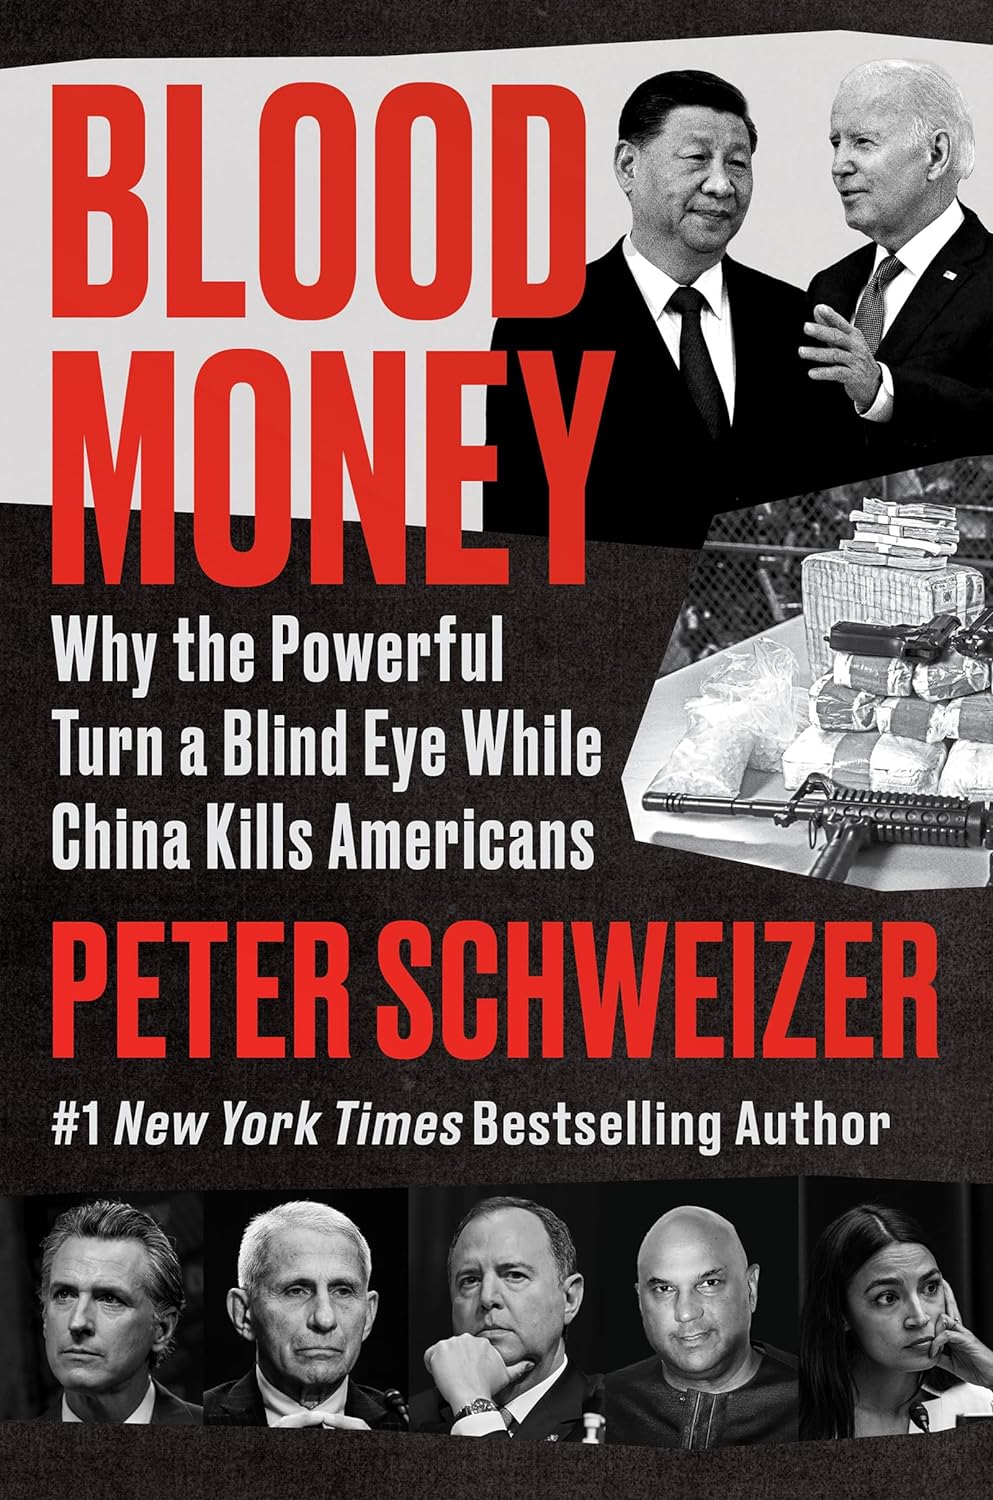 Blood Money: Why the Powerful Turn a Blind Eye While China Kills Americans Review